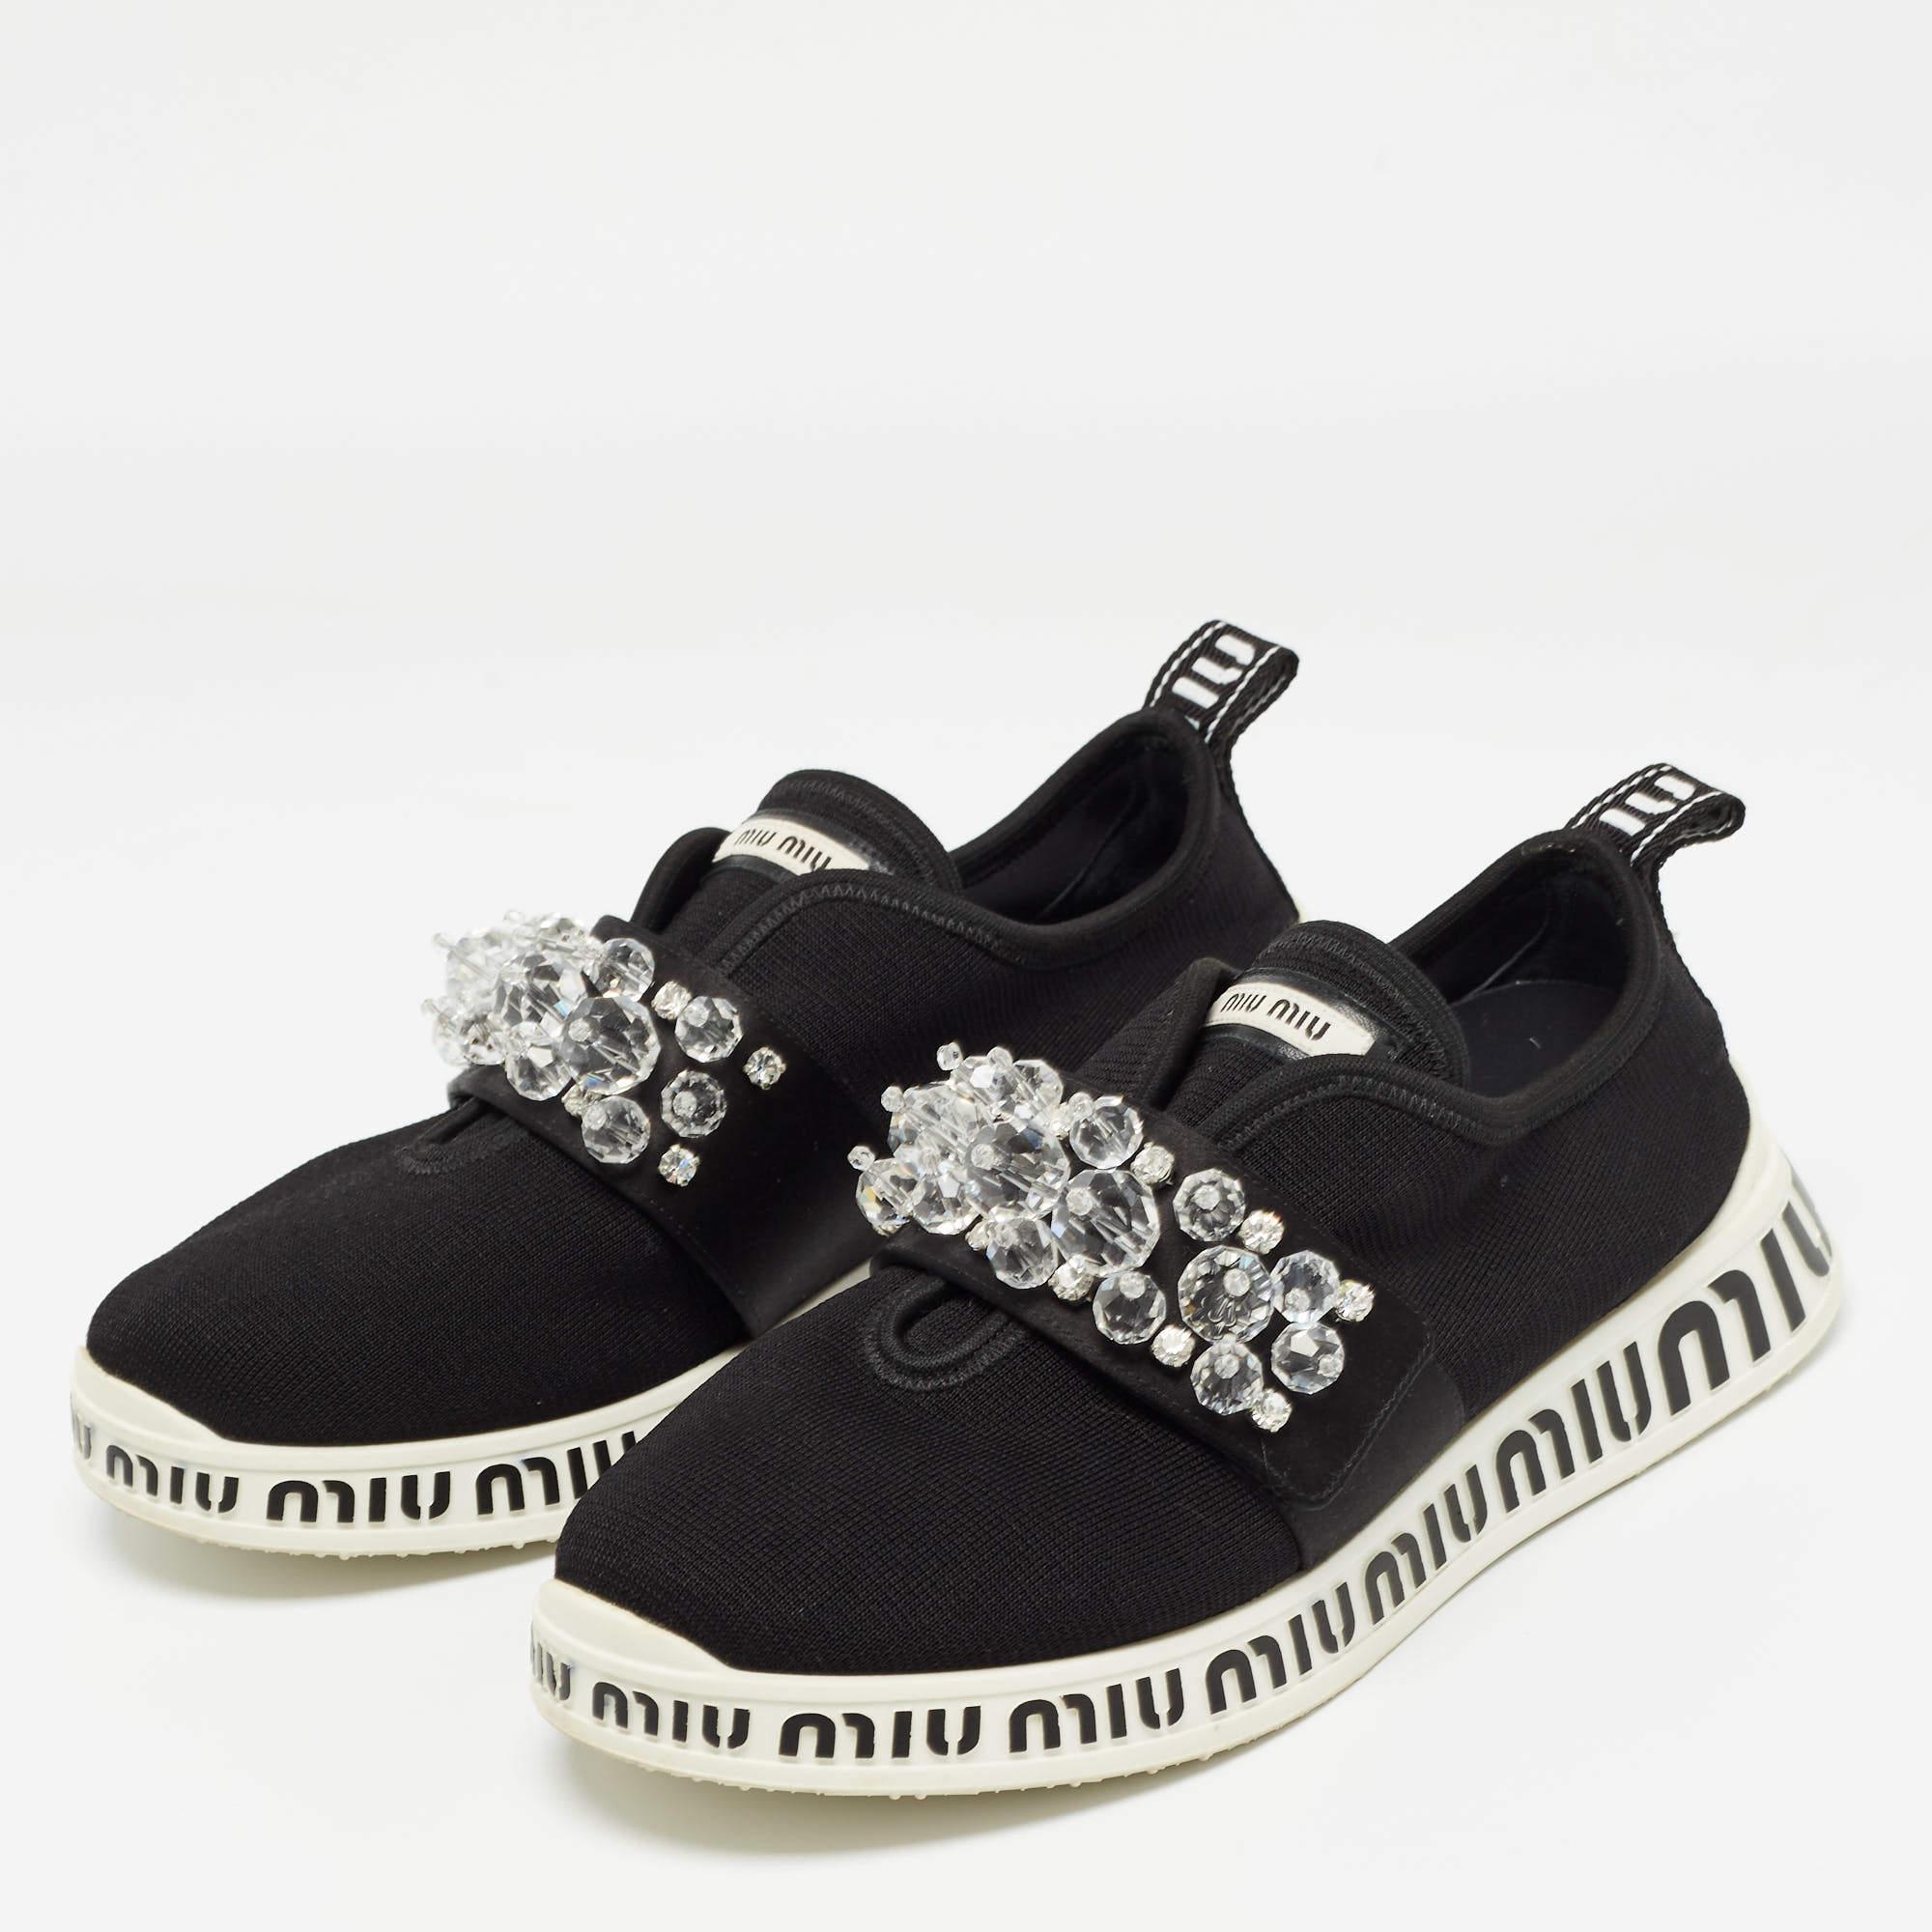 Miu Miu Black Fabric and Satin Crystal Embellished Slip On Sneakers Size 38.5 For Sale 2